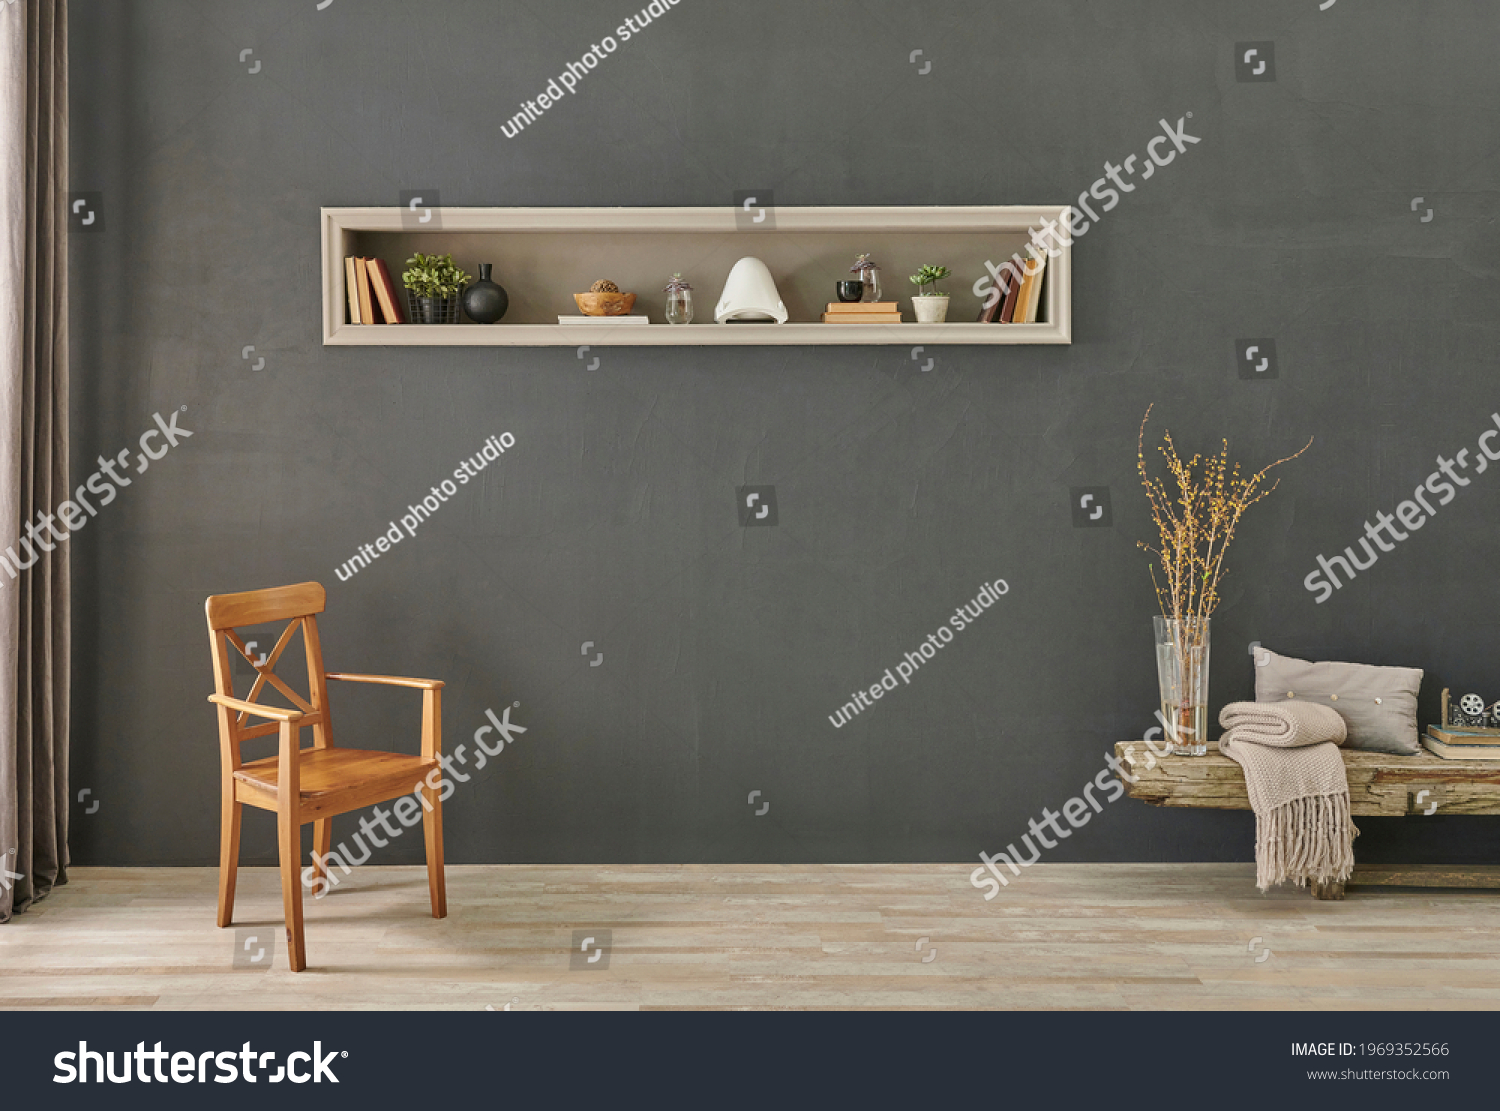 143,965 White wall sofa chair Images, Stock Photos & Vectors | Shutterstock